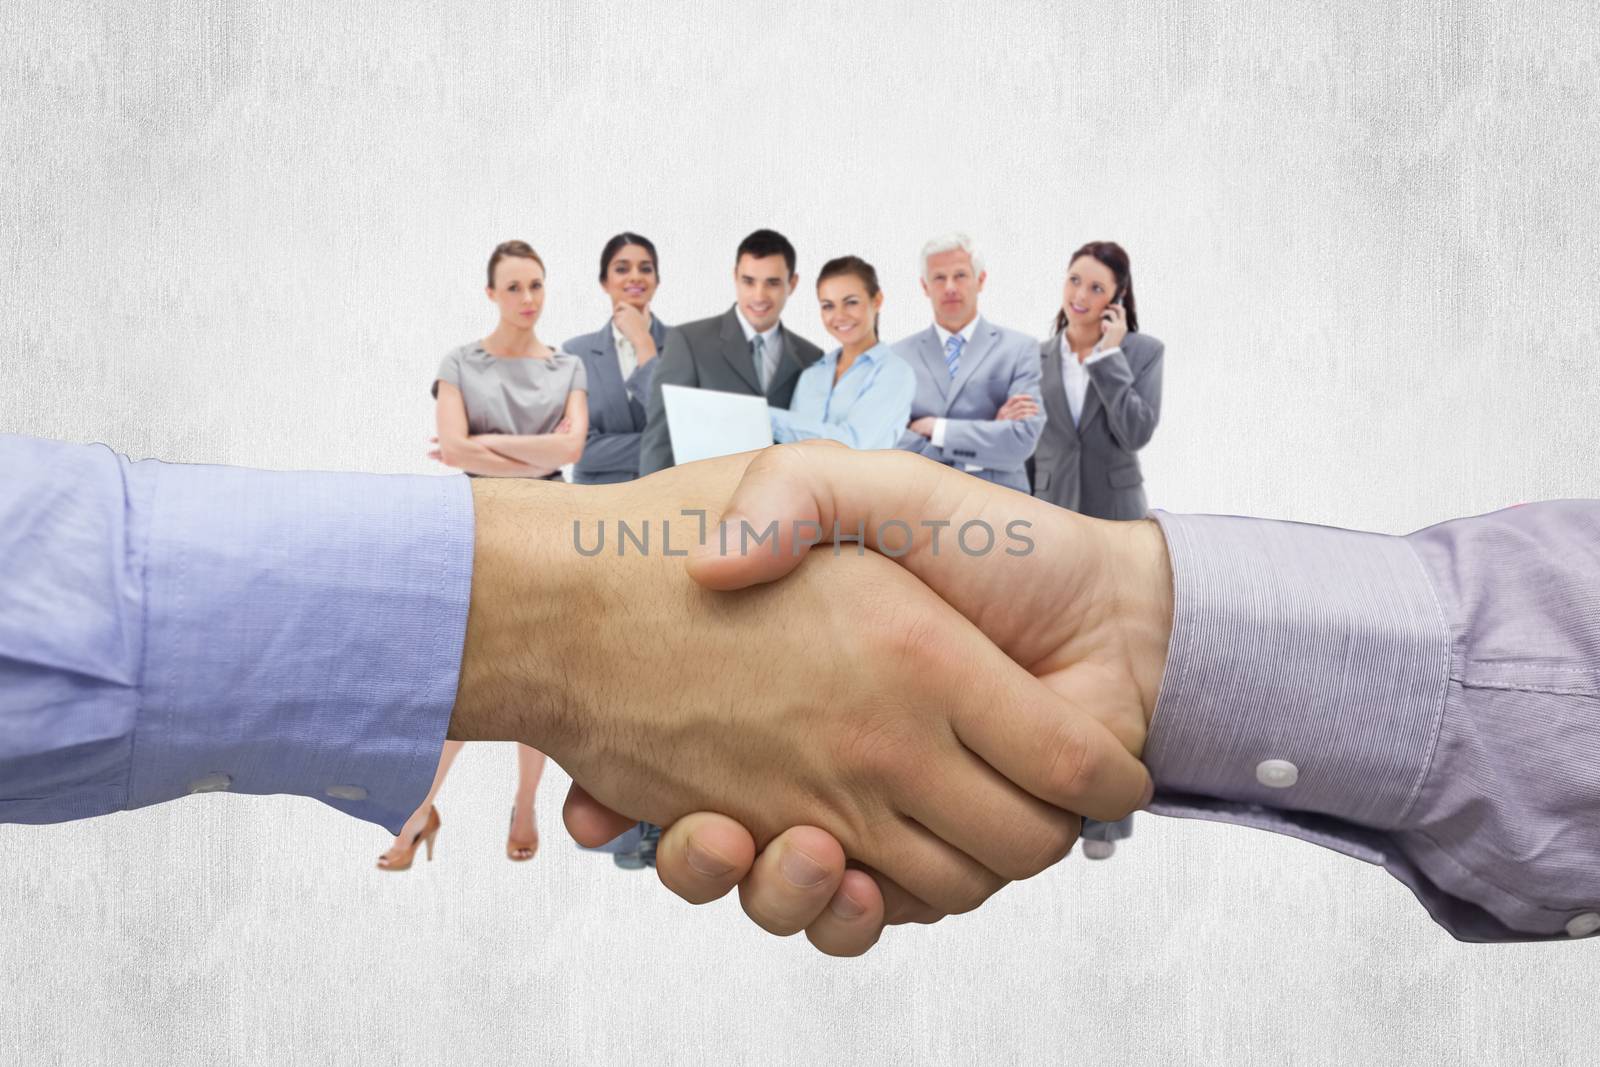 Hand shake in front of wires against white background